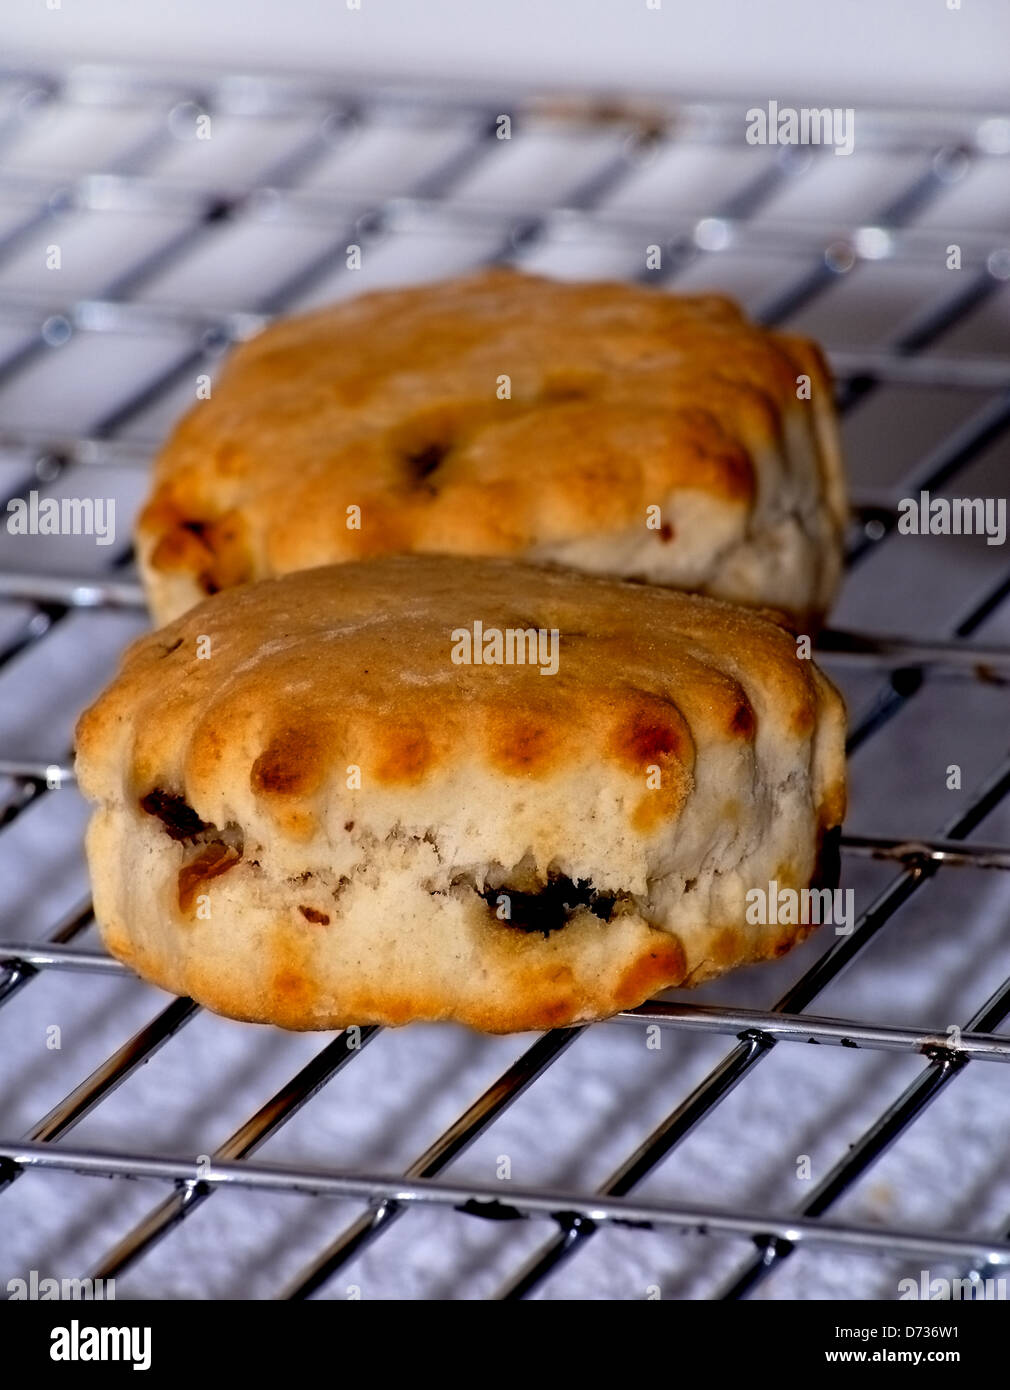 Home baked scones fresh from the oven, on a cooling rack. Stock Photo